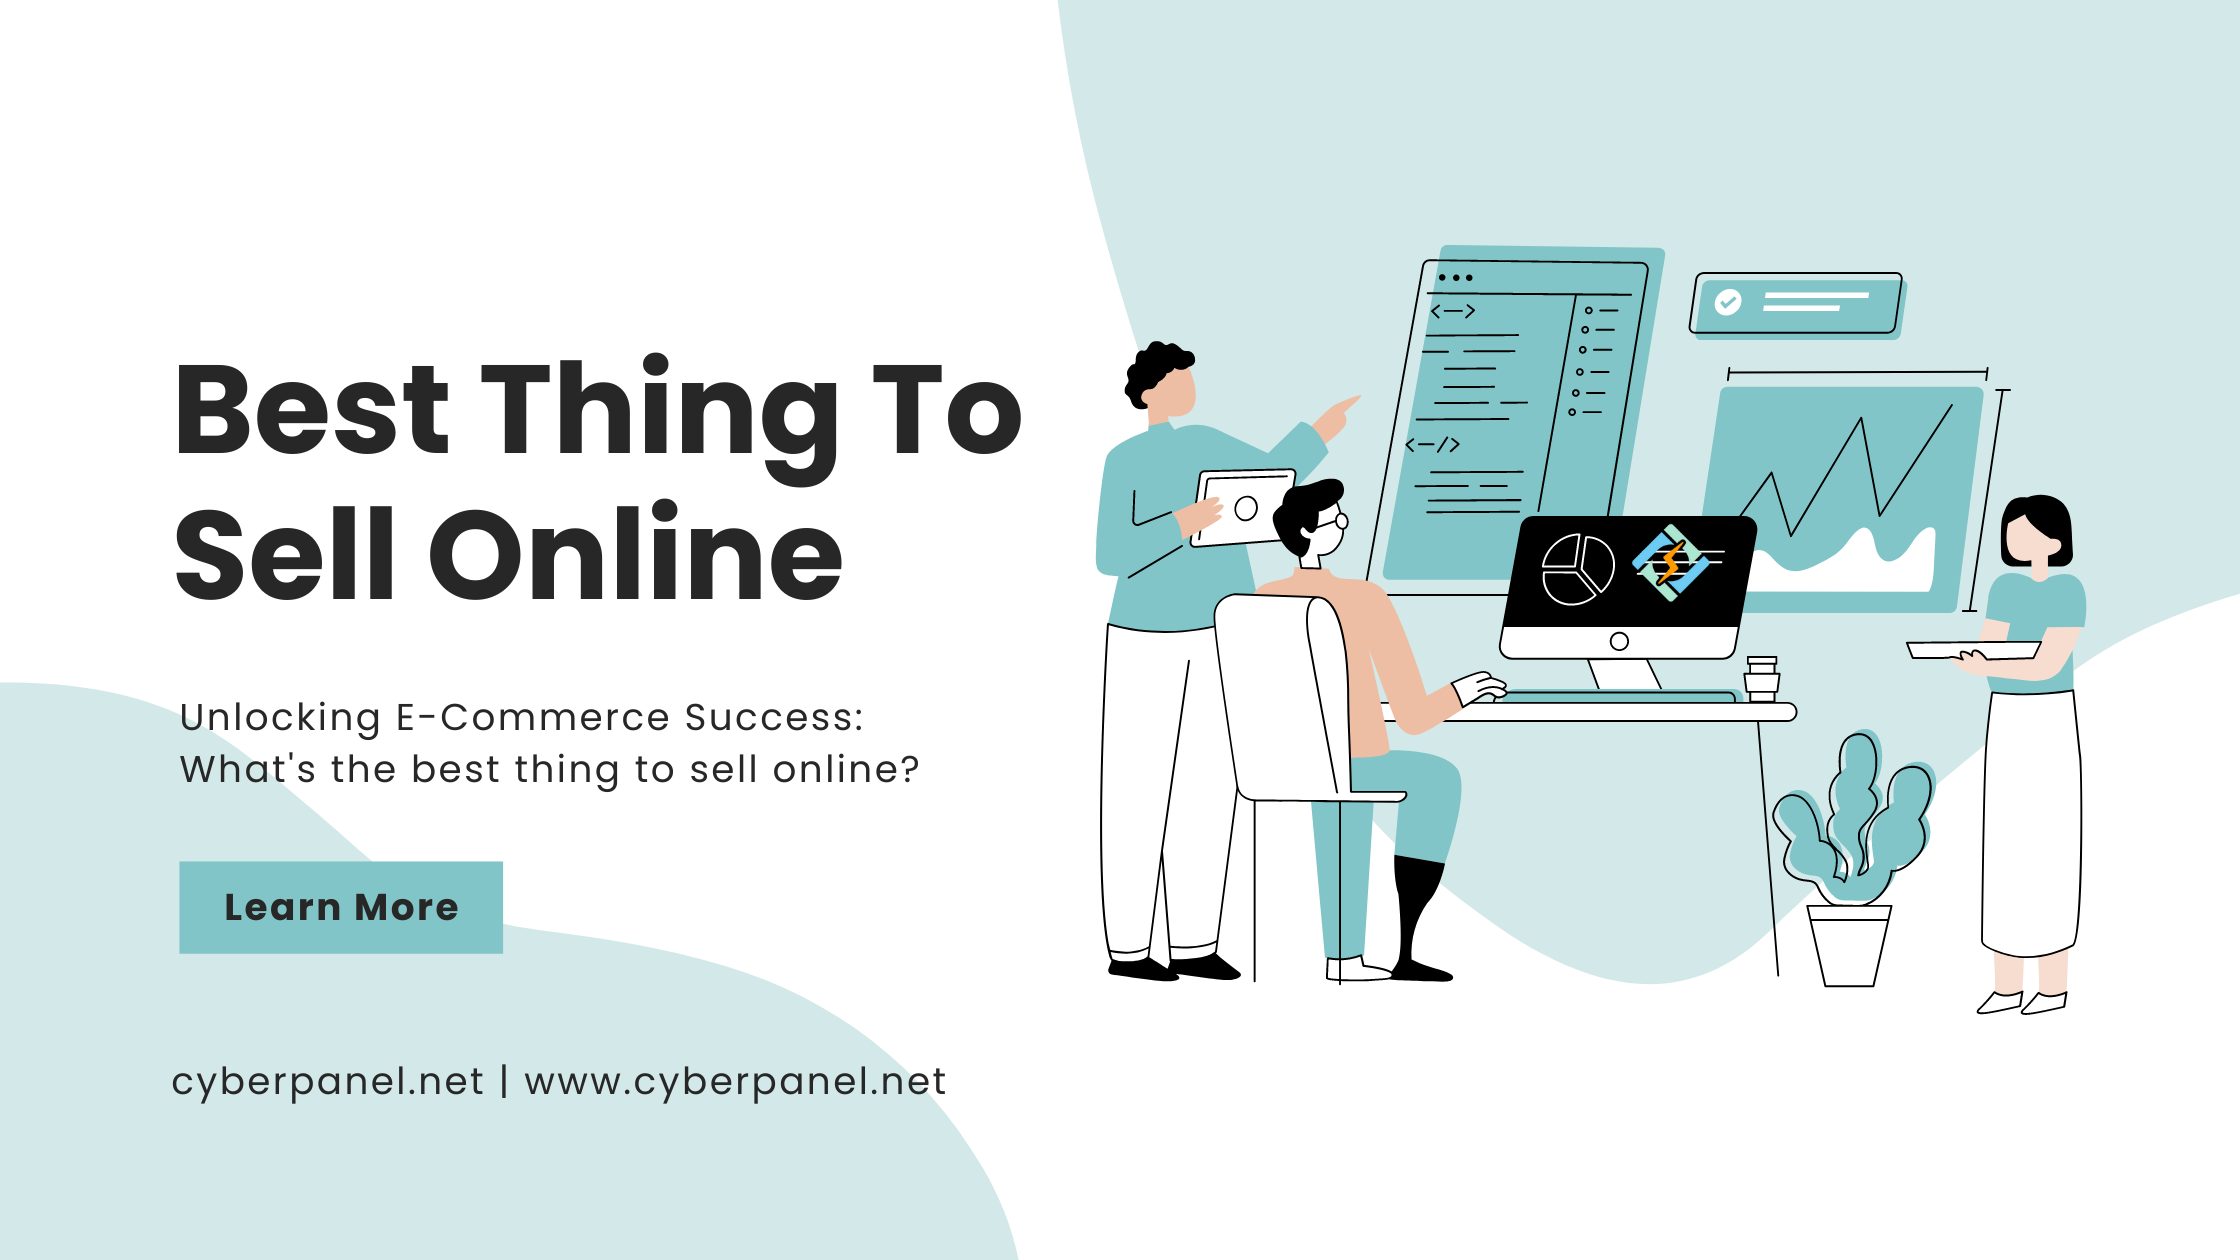 What's the best thing to sell online?